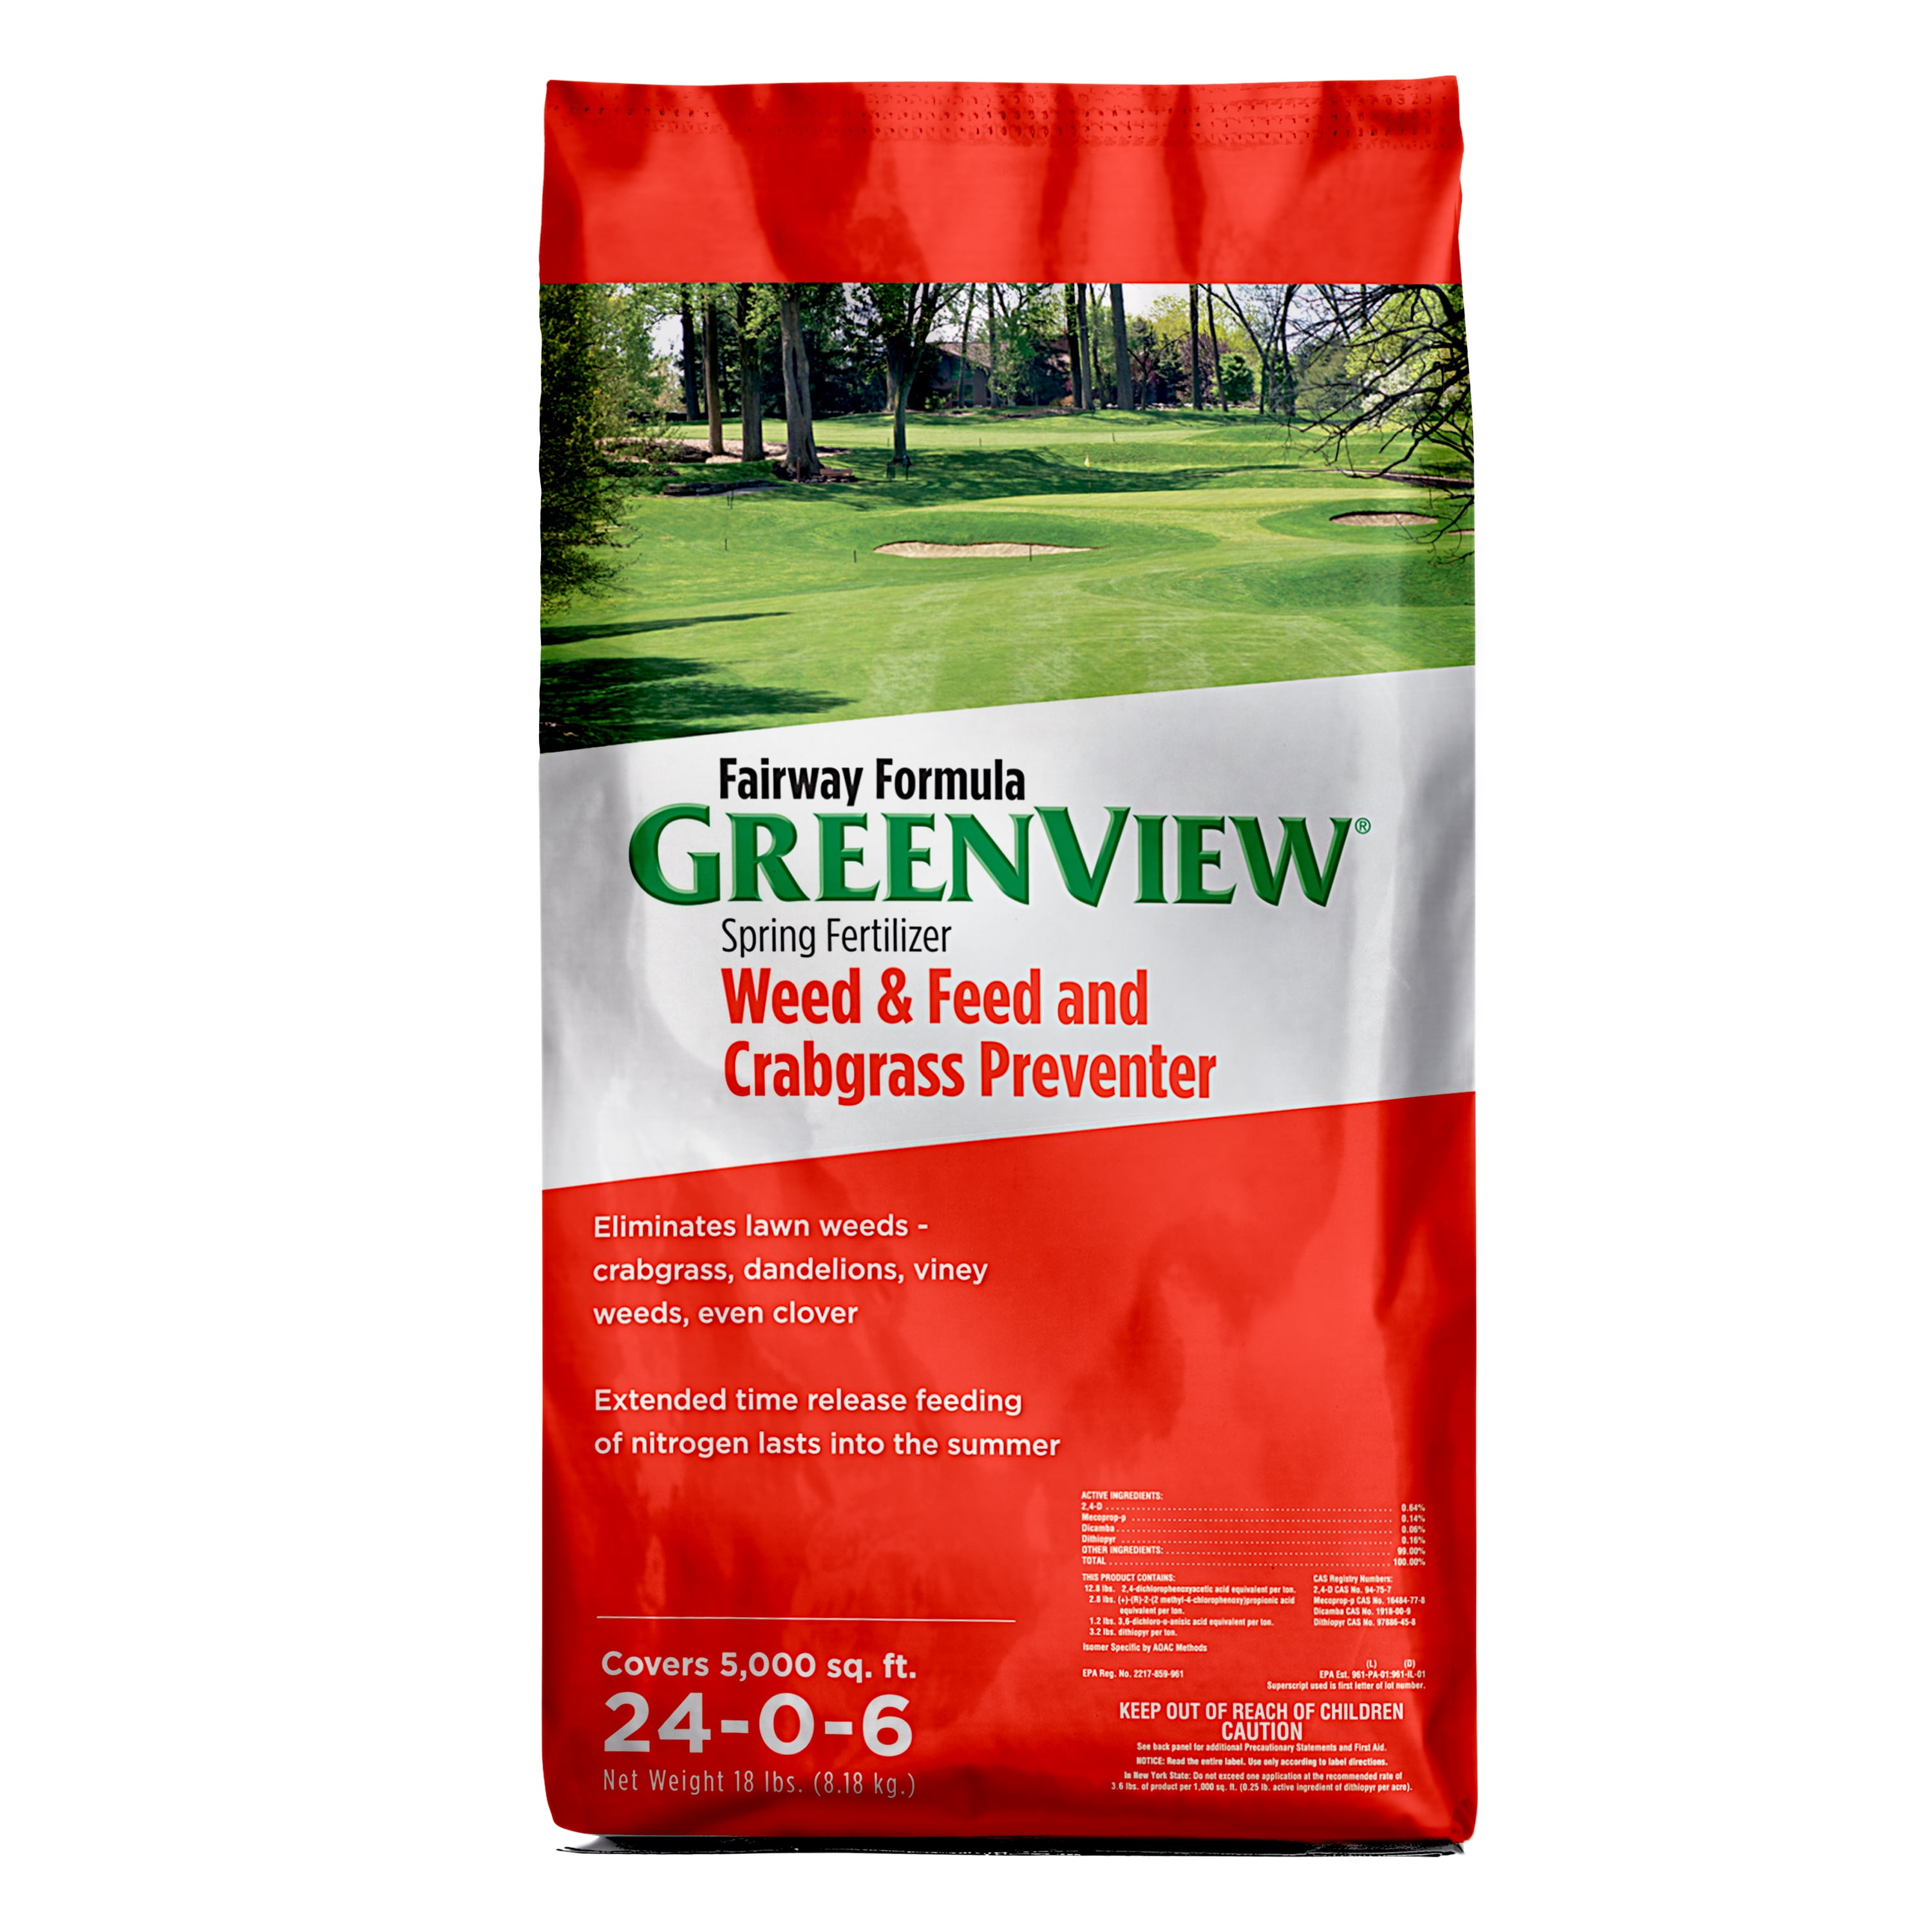 GreenView Fairway Formula Spring Fertilizer Weed and Feed + Crabgrass Preventer - 18 lbs Covers 5,000 Sq